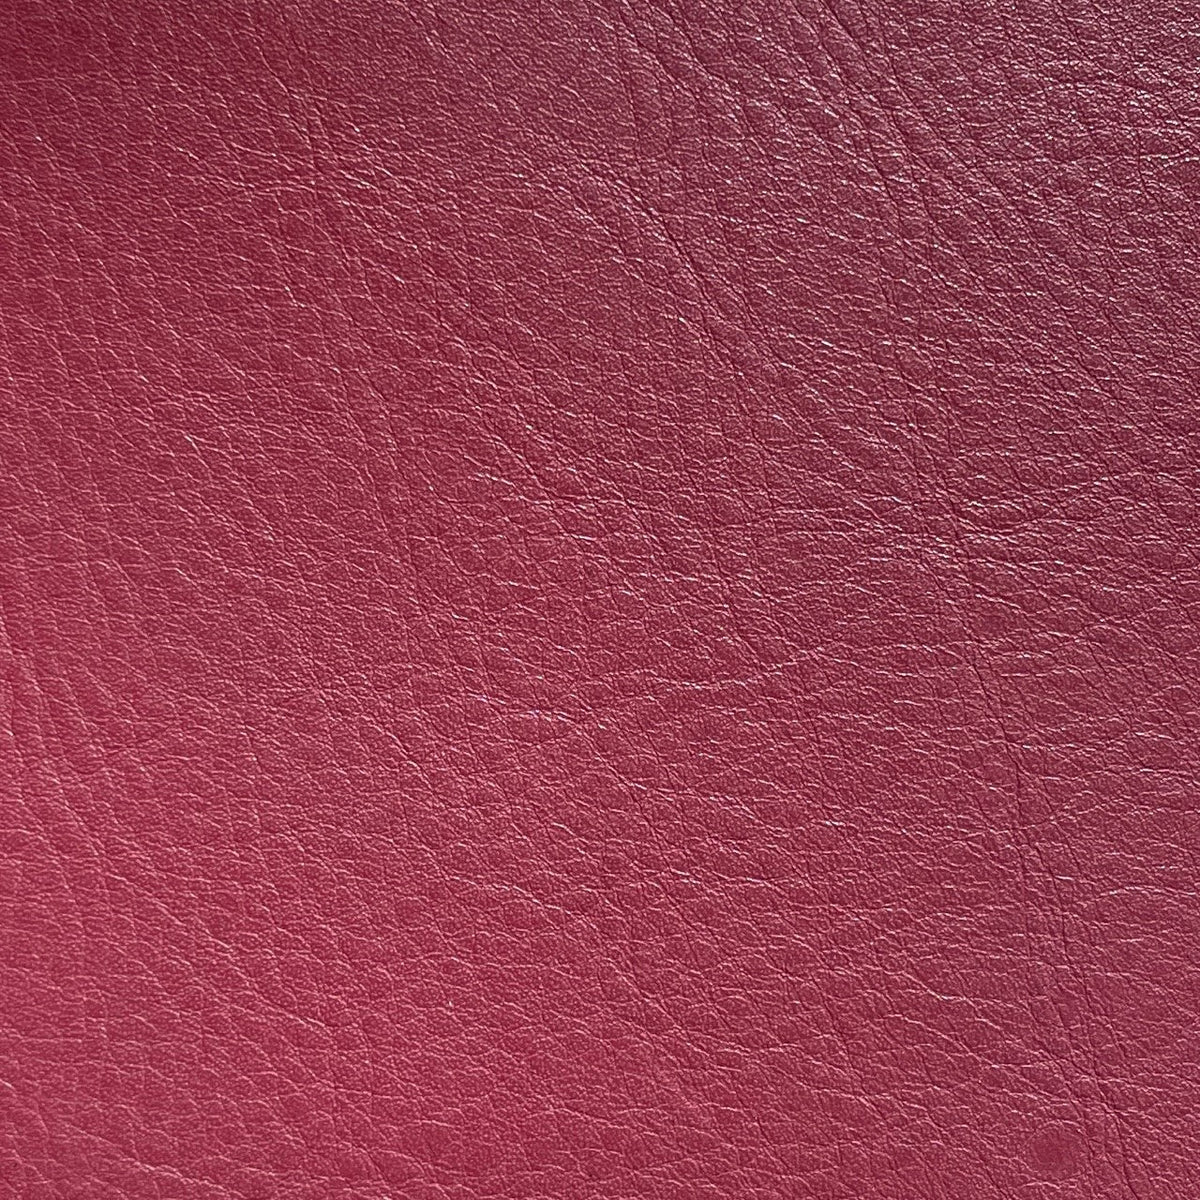 Olympia Cow Half Side | Plum | 1.5 mm | 10.5 sq.ft | From $160 ea.